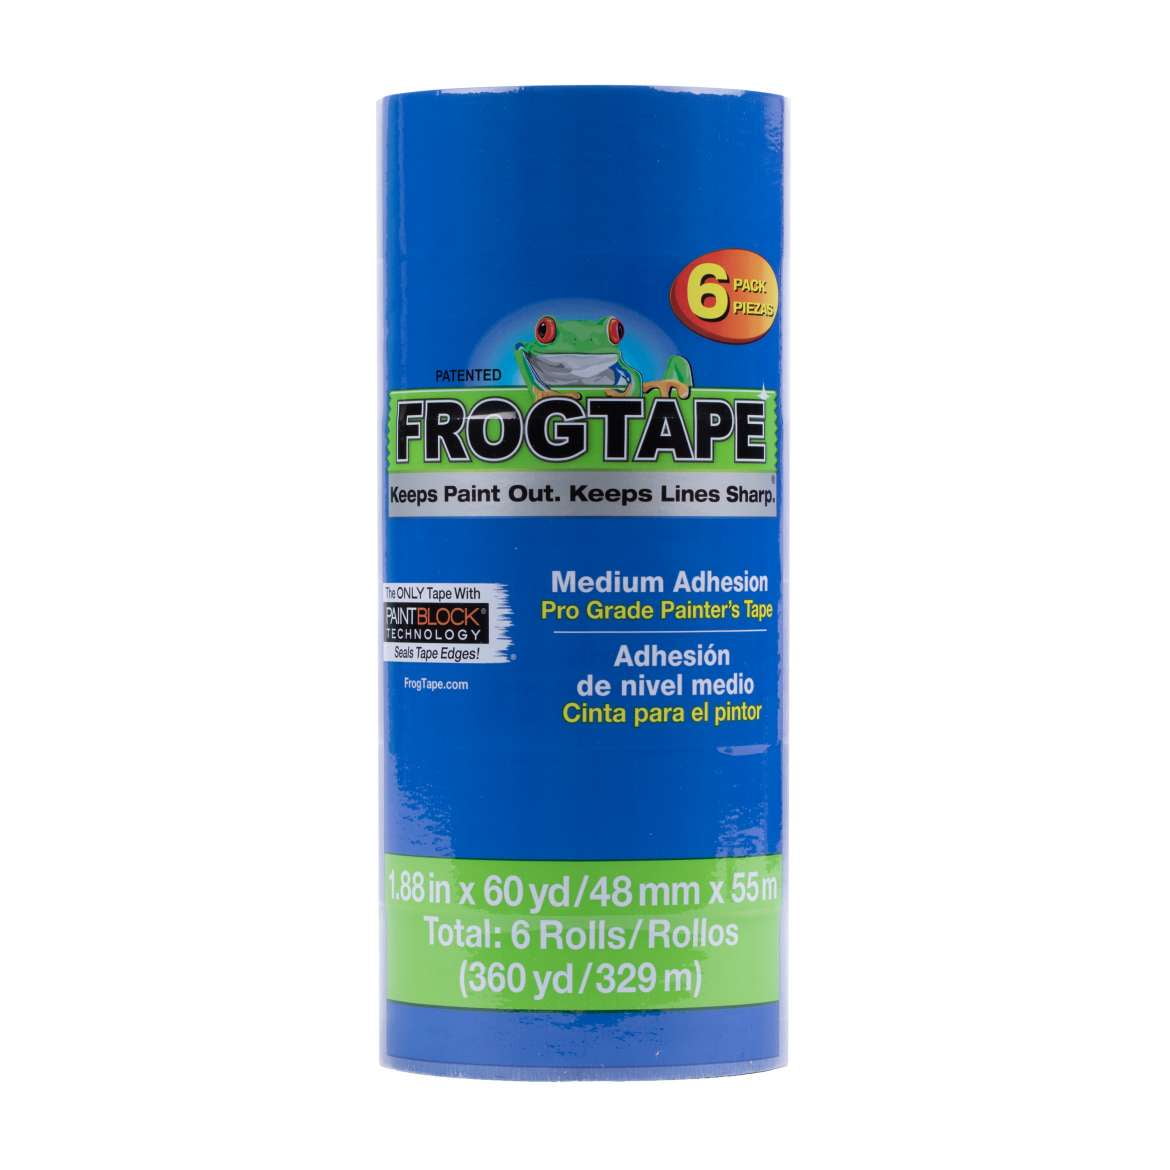 1 FROGTAPE 280222 Delicate Surface Painters Tape with PaintBlock Yellow 1.88 inch Width